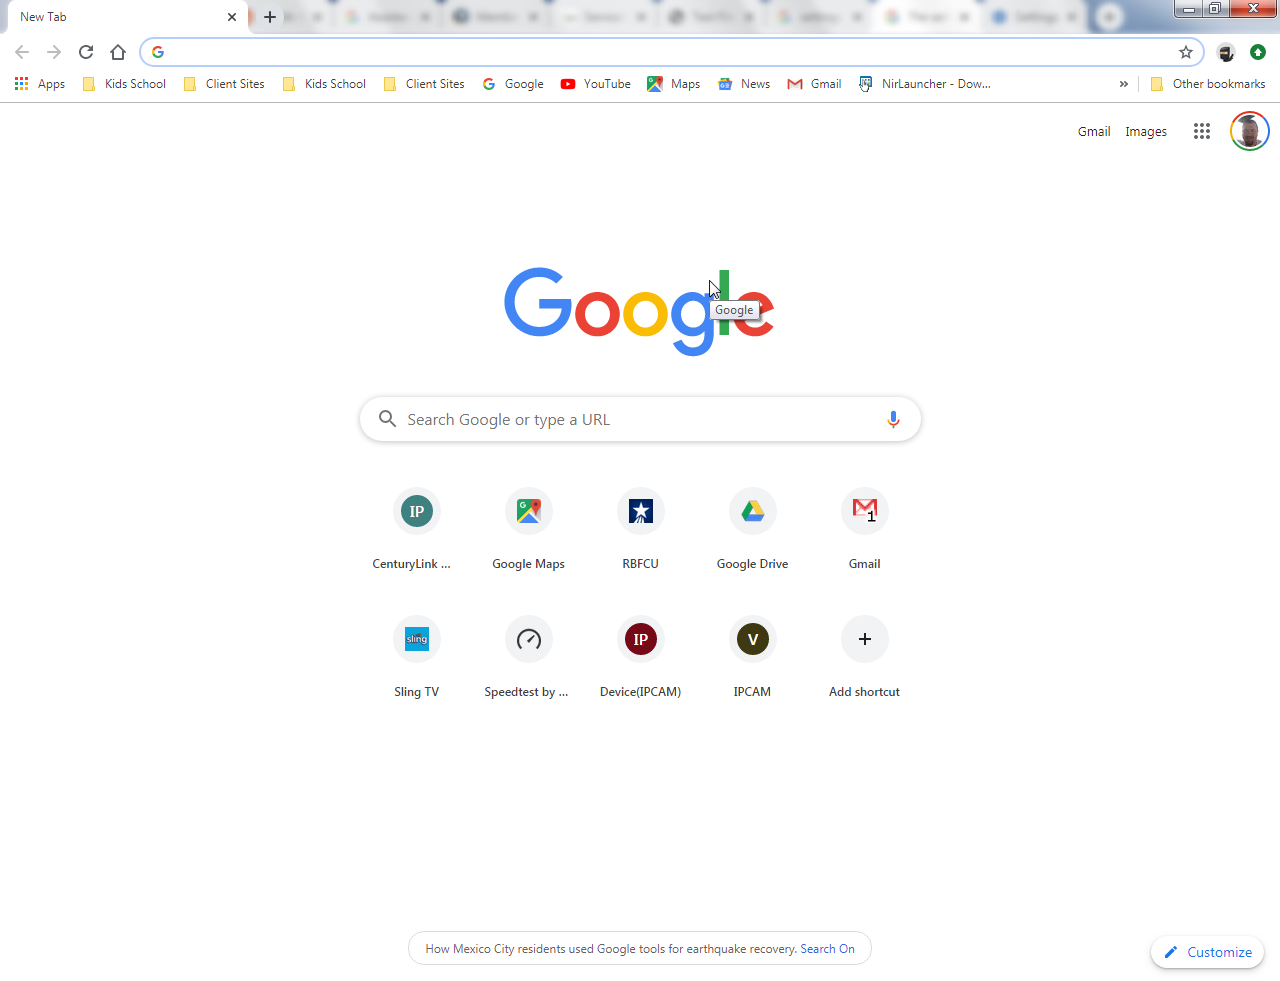 Open Google Chrome or any other browser you are using with Google Drive File Stream.
Click on the three vertical dots in the top-right corner of the browser window.